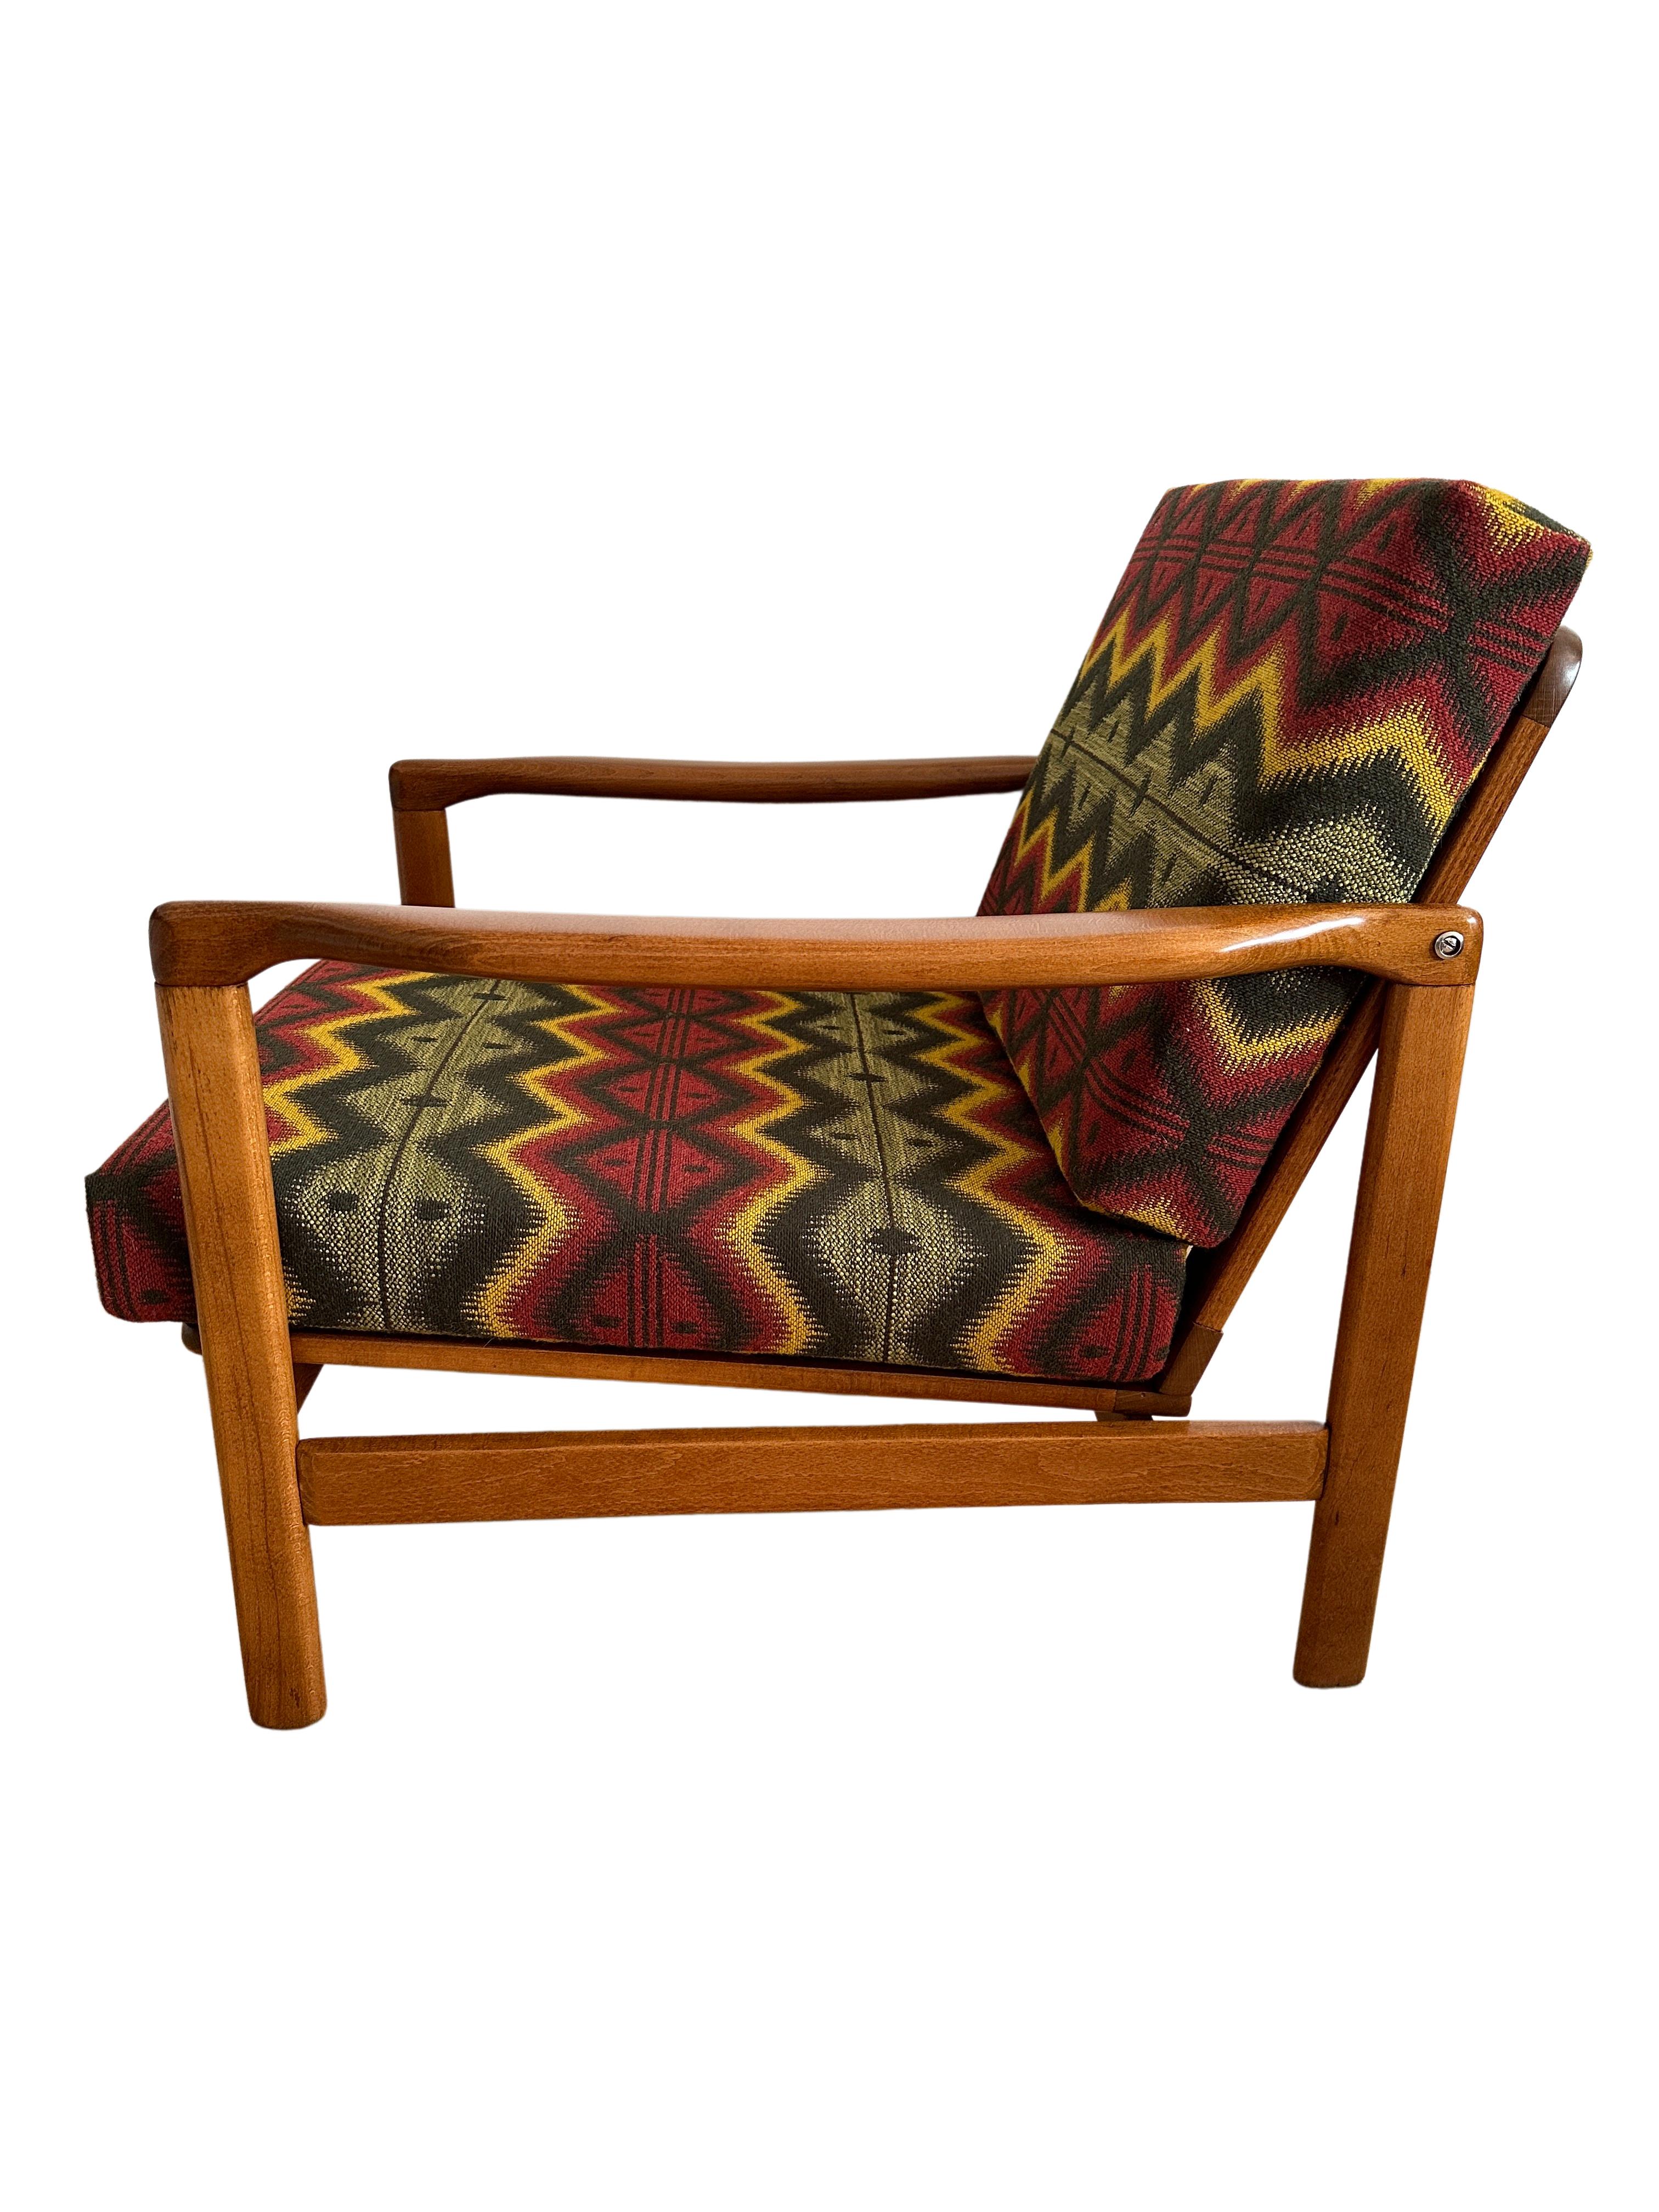 Set of Two Armchairs by Zenon Bączyk, Mind the Gap Upholstery, Europe, 1960s For Sale 1